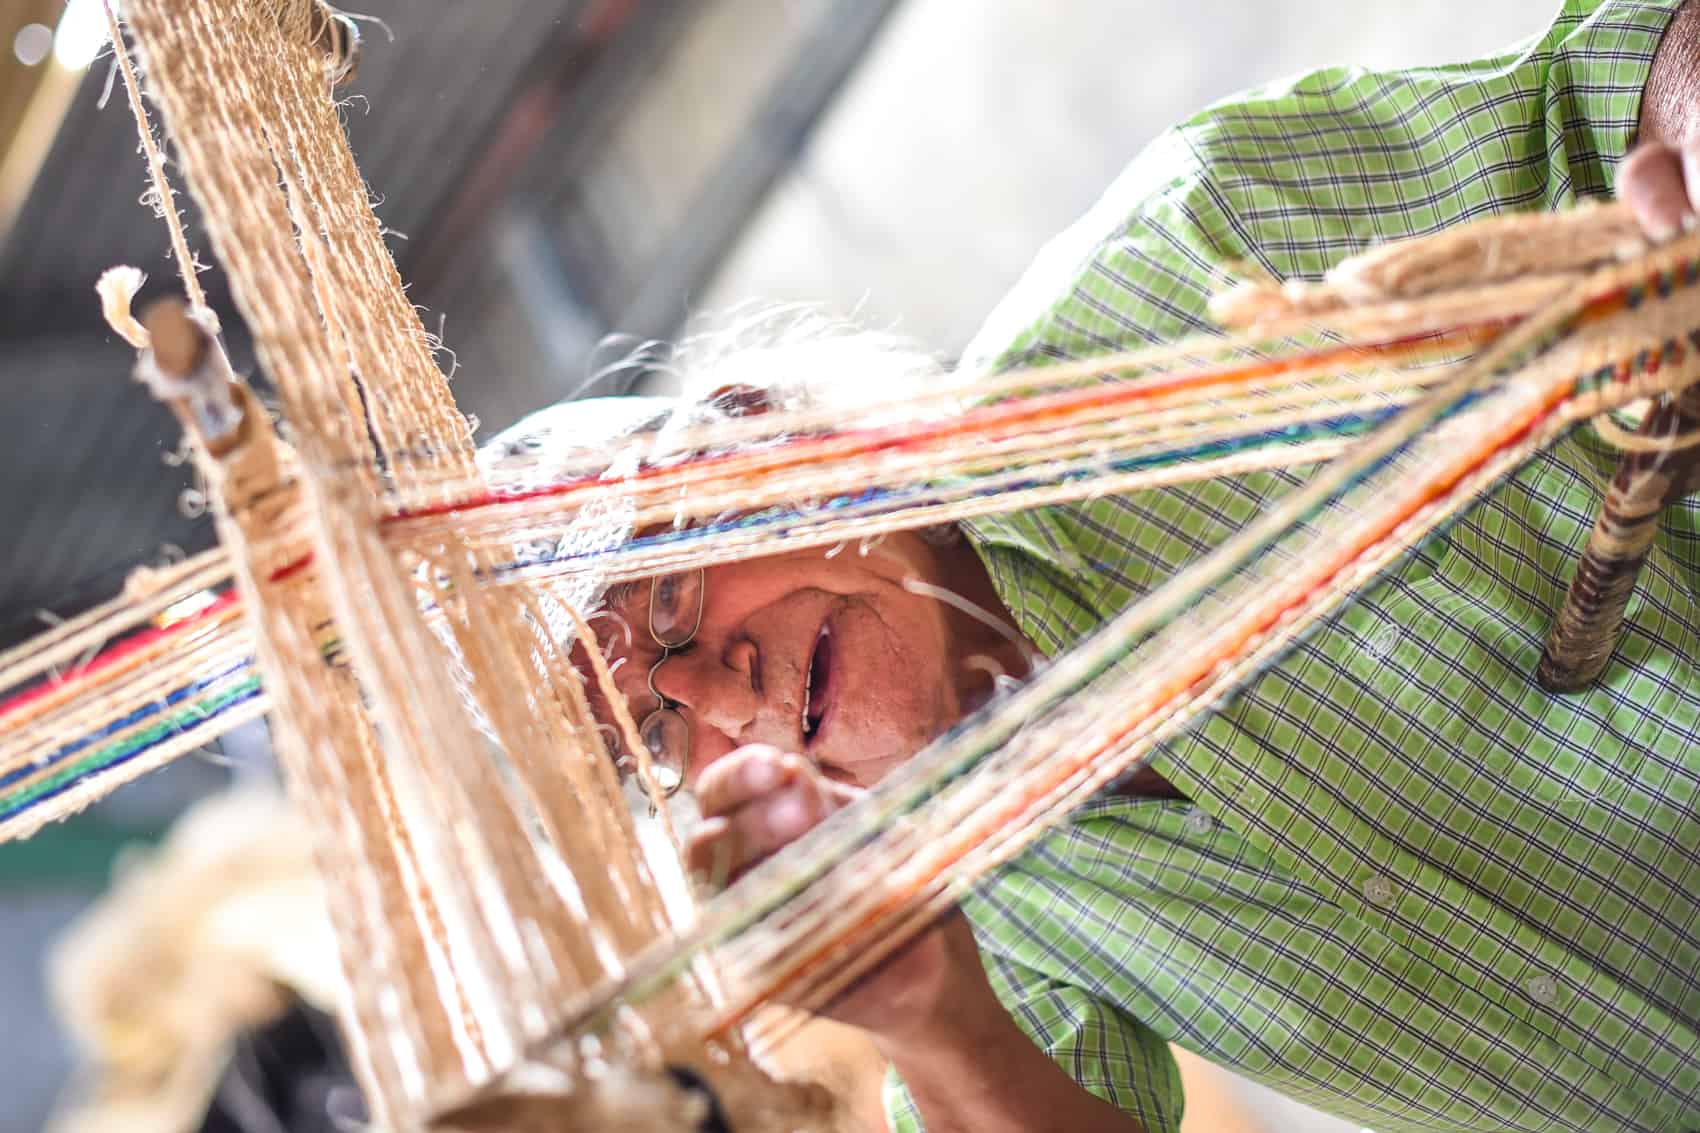 Juan Olivado Camacho, known as Don Tina, 74, explains how he uses a loom and cabuya thread to make products.